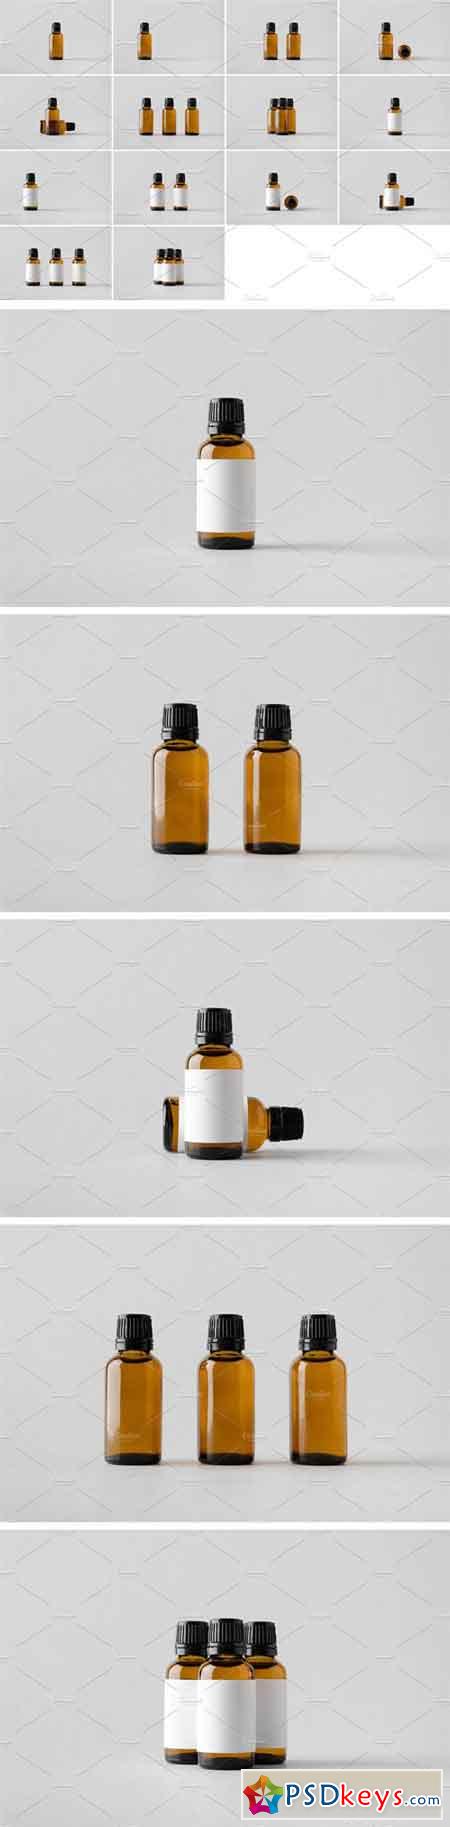 Download Bottle Page 15 Free Download Photoshop Vector Stock Image Via Torrent Zippyshare From Psdkeys Com PSD Mockup Templates